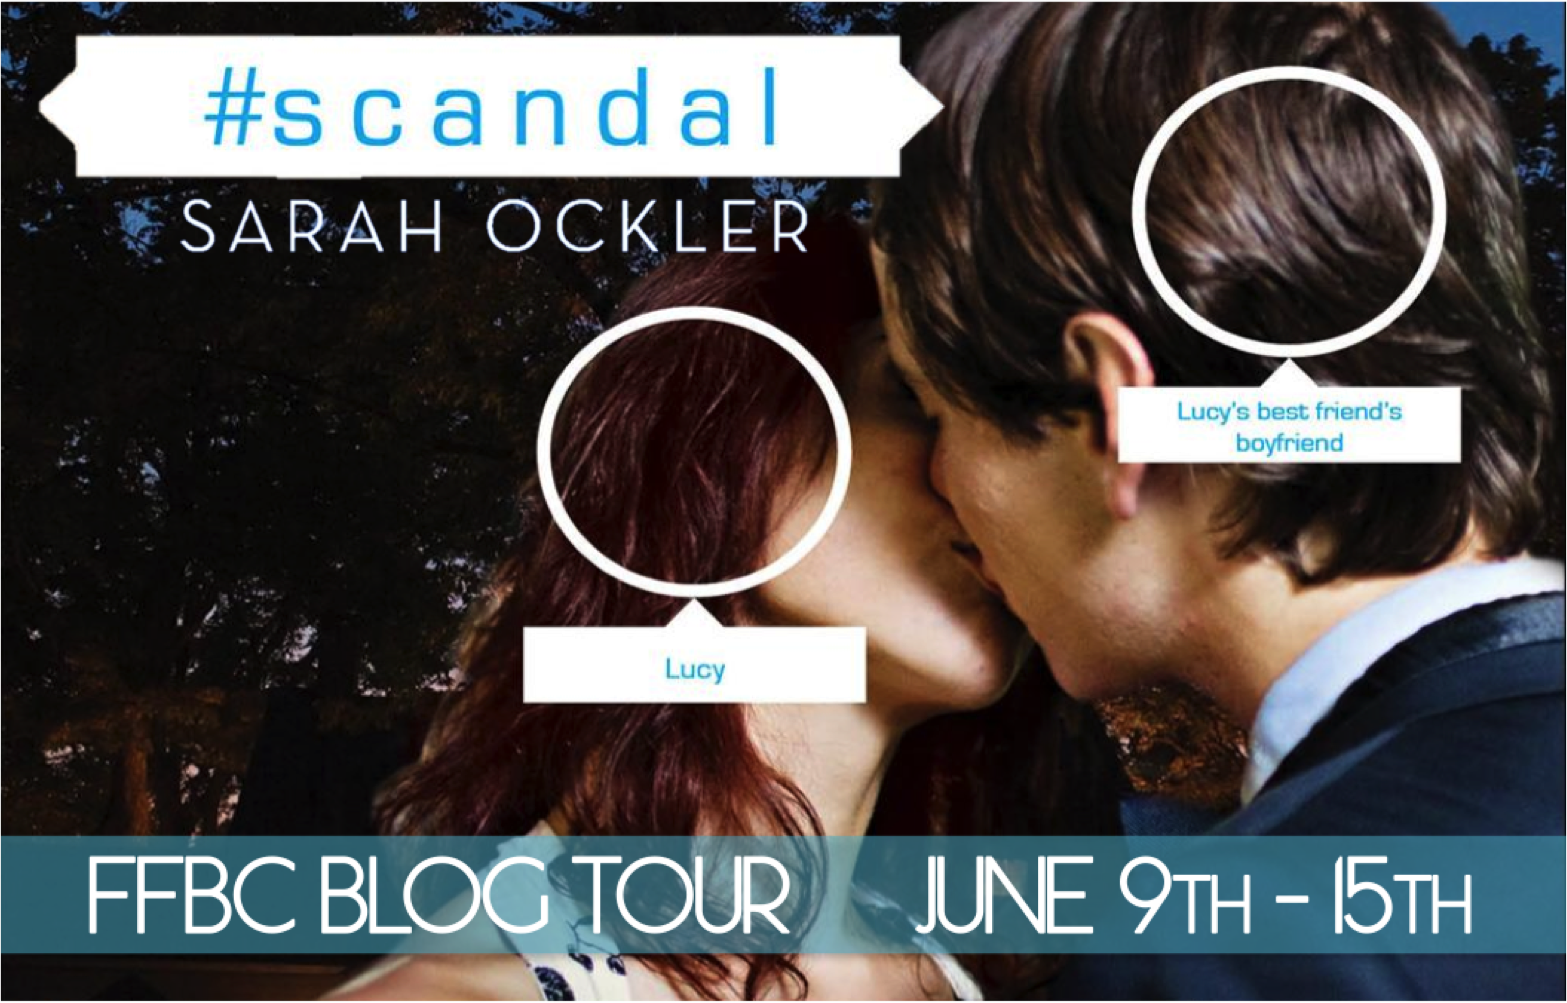 http://theunofficialaddictionbookfanclub.blogspot.com/2014/06/ffbc-welcome-to-club-scandal-by-sarah.html